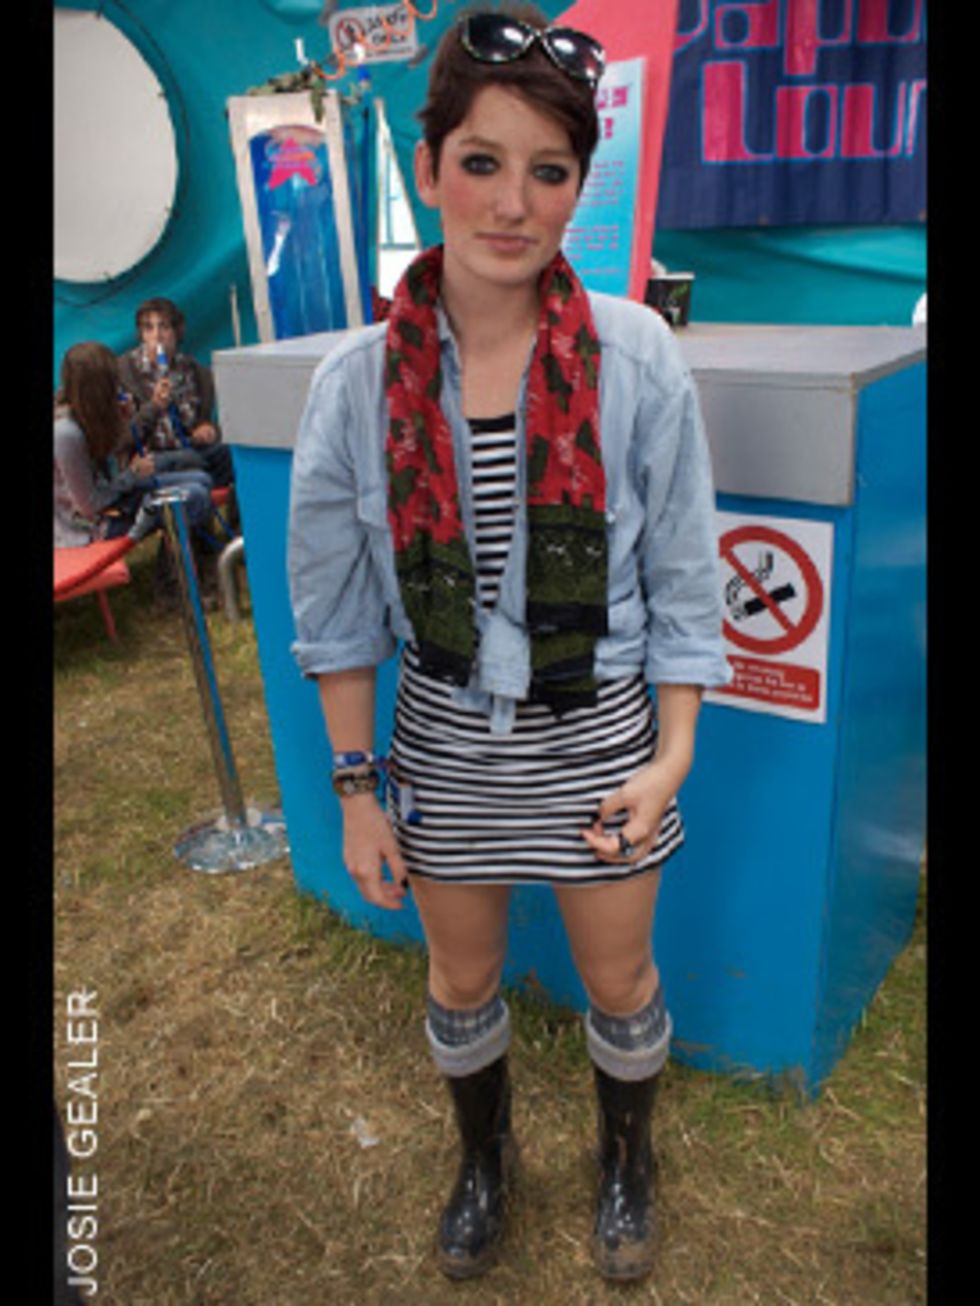 <p>Nicola Sullivan, a 19 year old student is wearing a Dress from Warehouse and a Vintage Shirt and Sunglasses.</p>